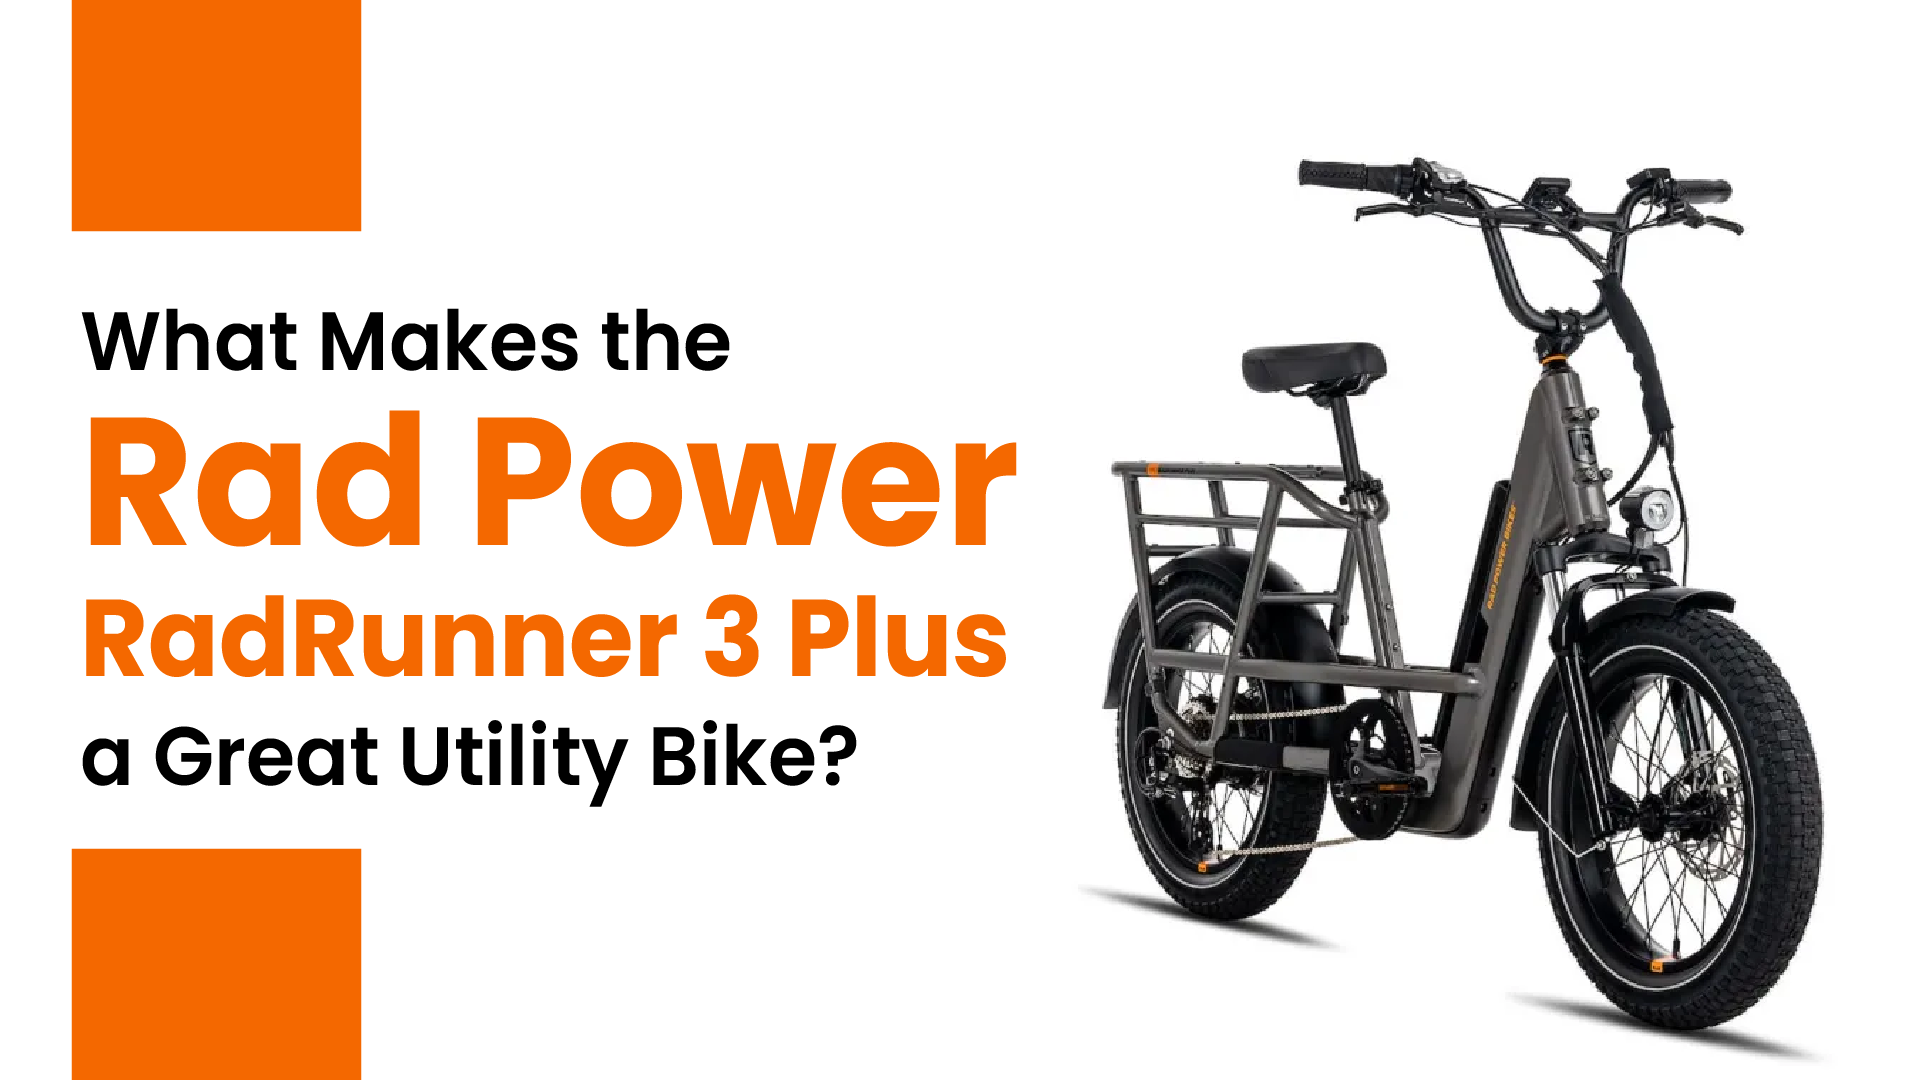 What Makes the Rad Power RadRunner 3 Plus a Great Utility Bike?